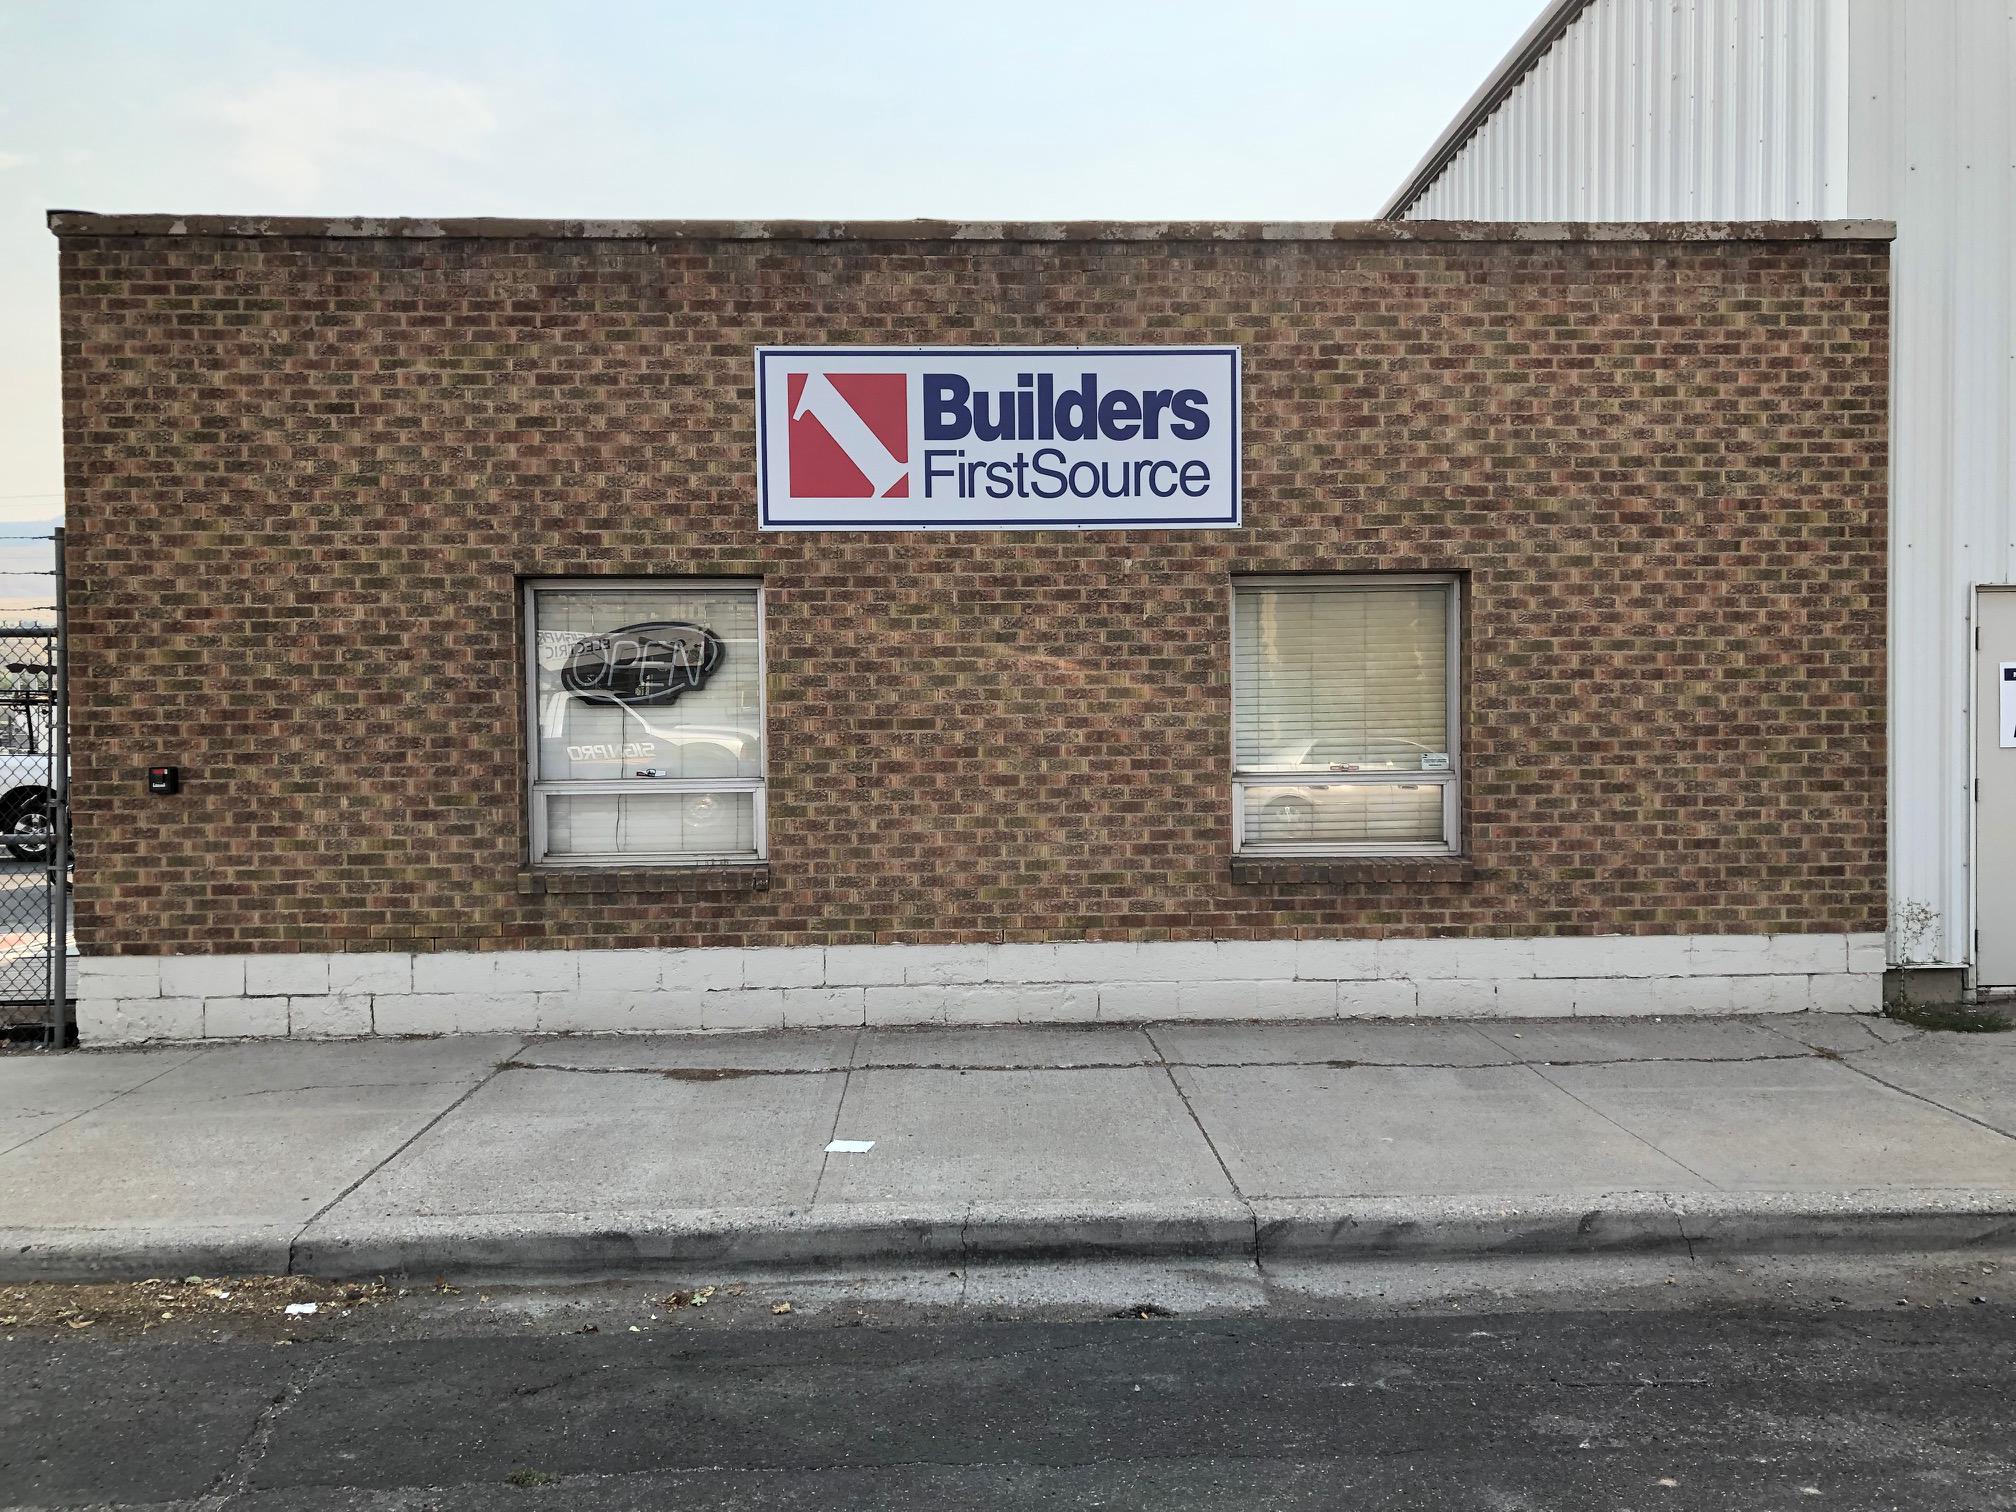 Builders FirstSource Building Sign